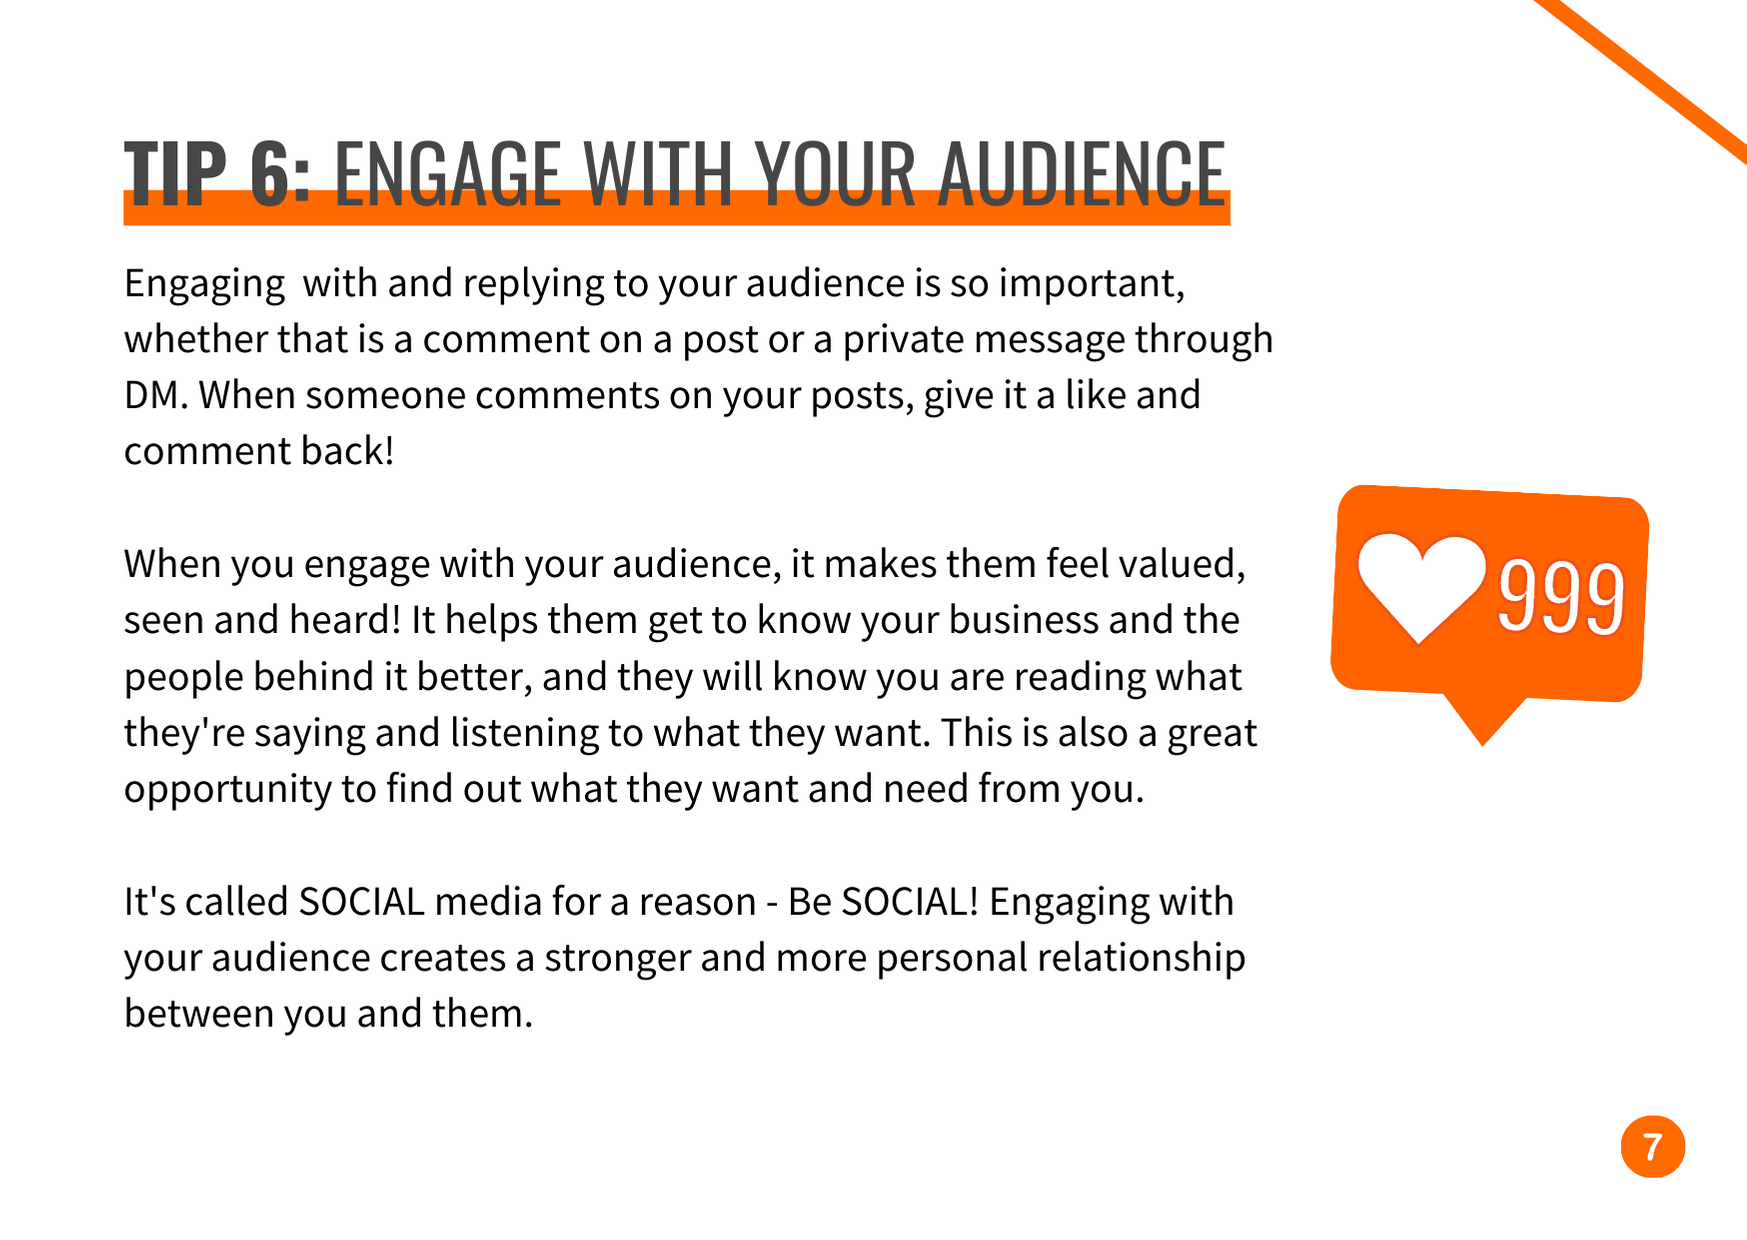 Tip 6 Engage with your audience